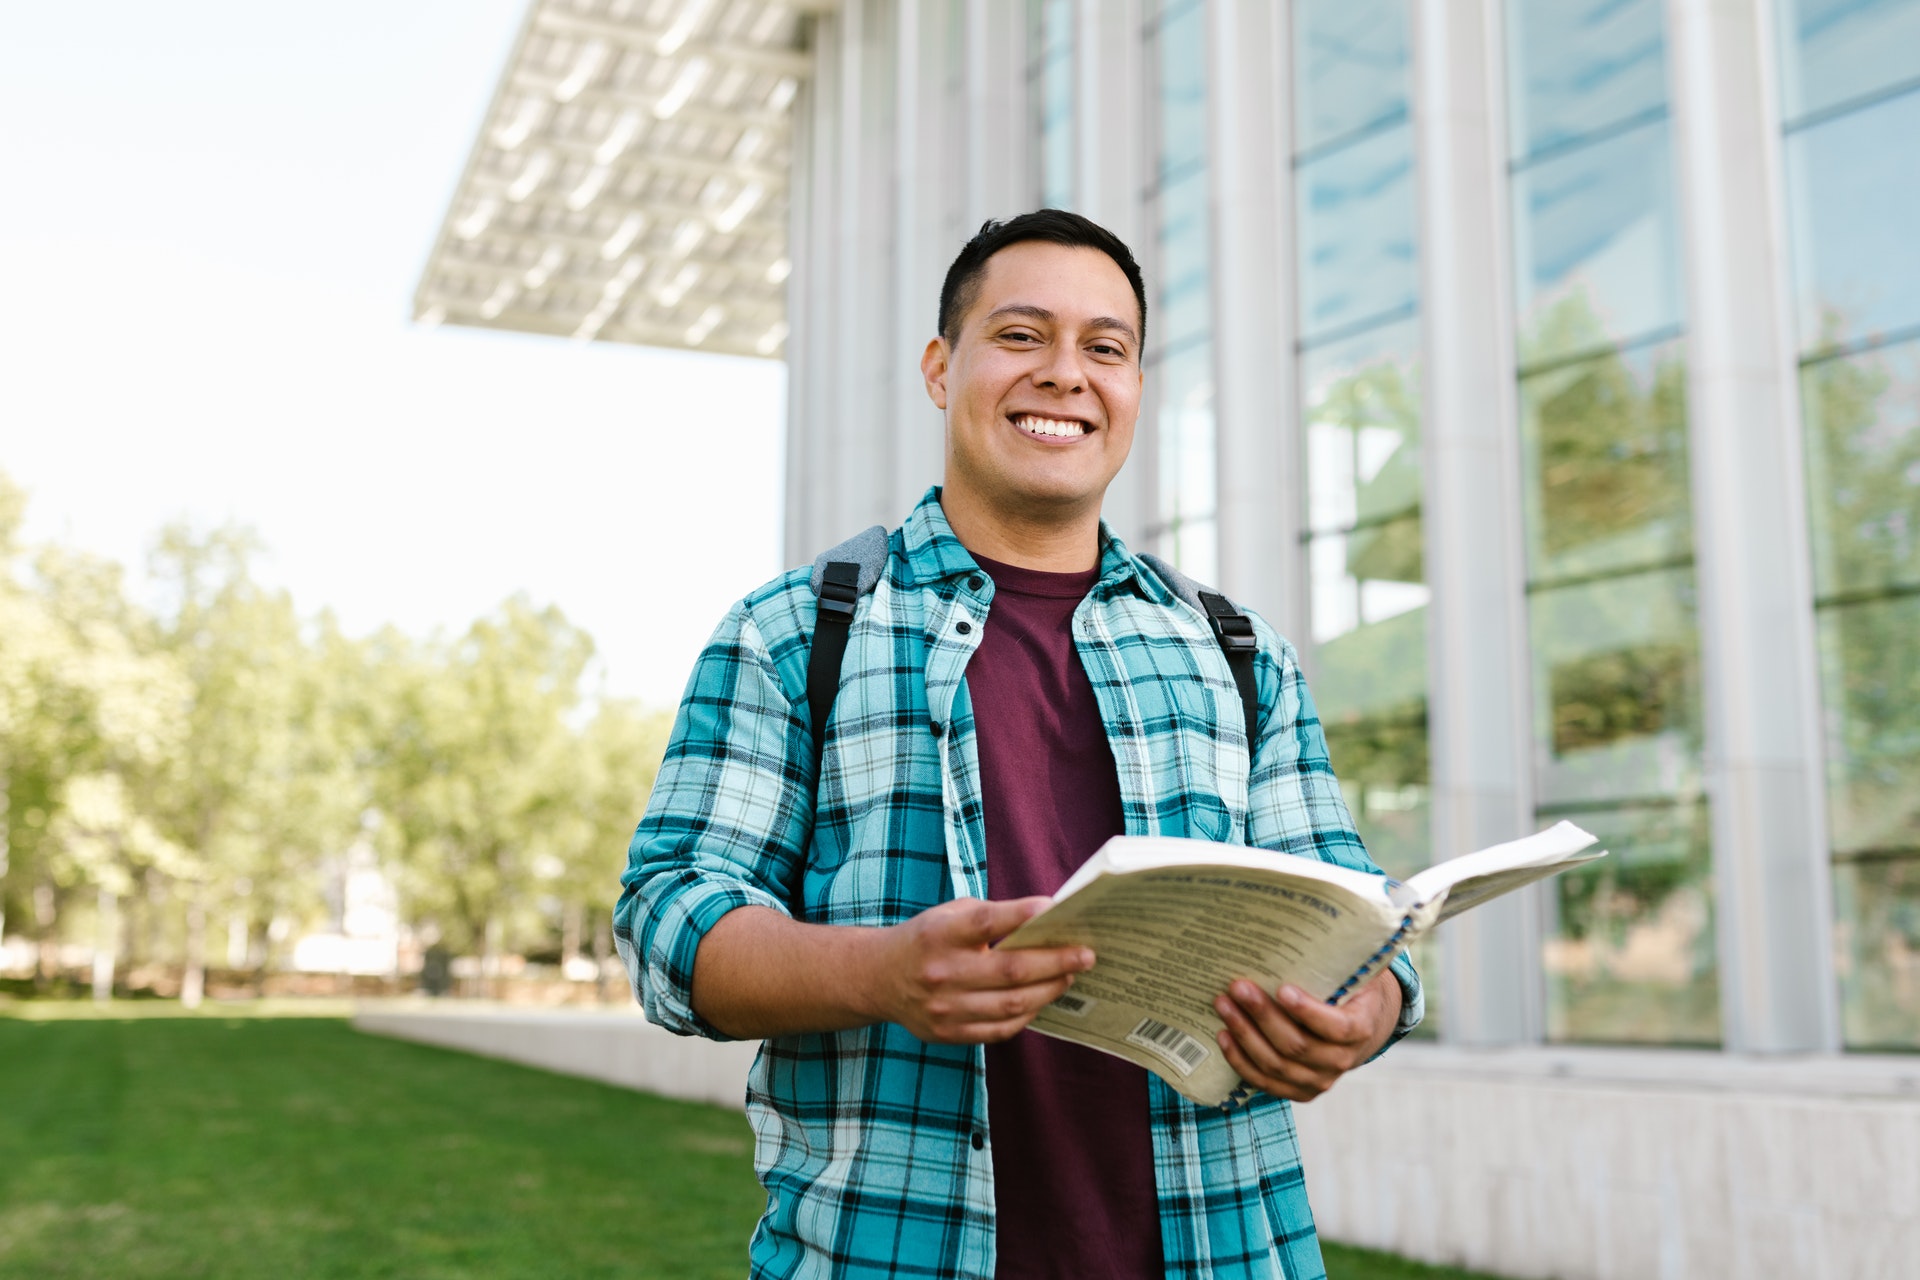 Male teacher holding book, standing outdoors and smiling